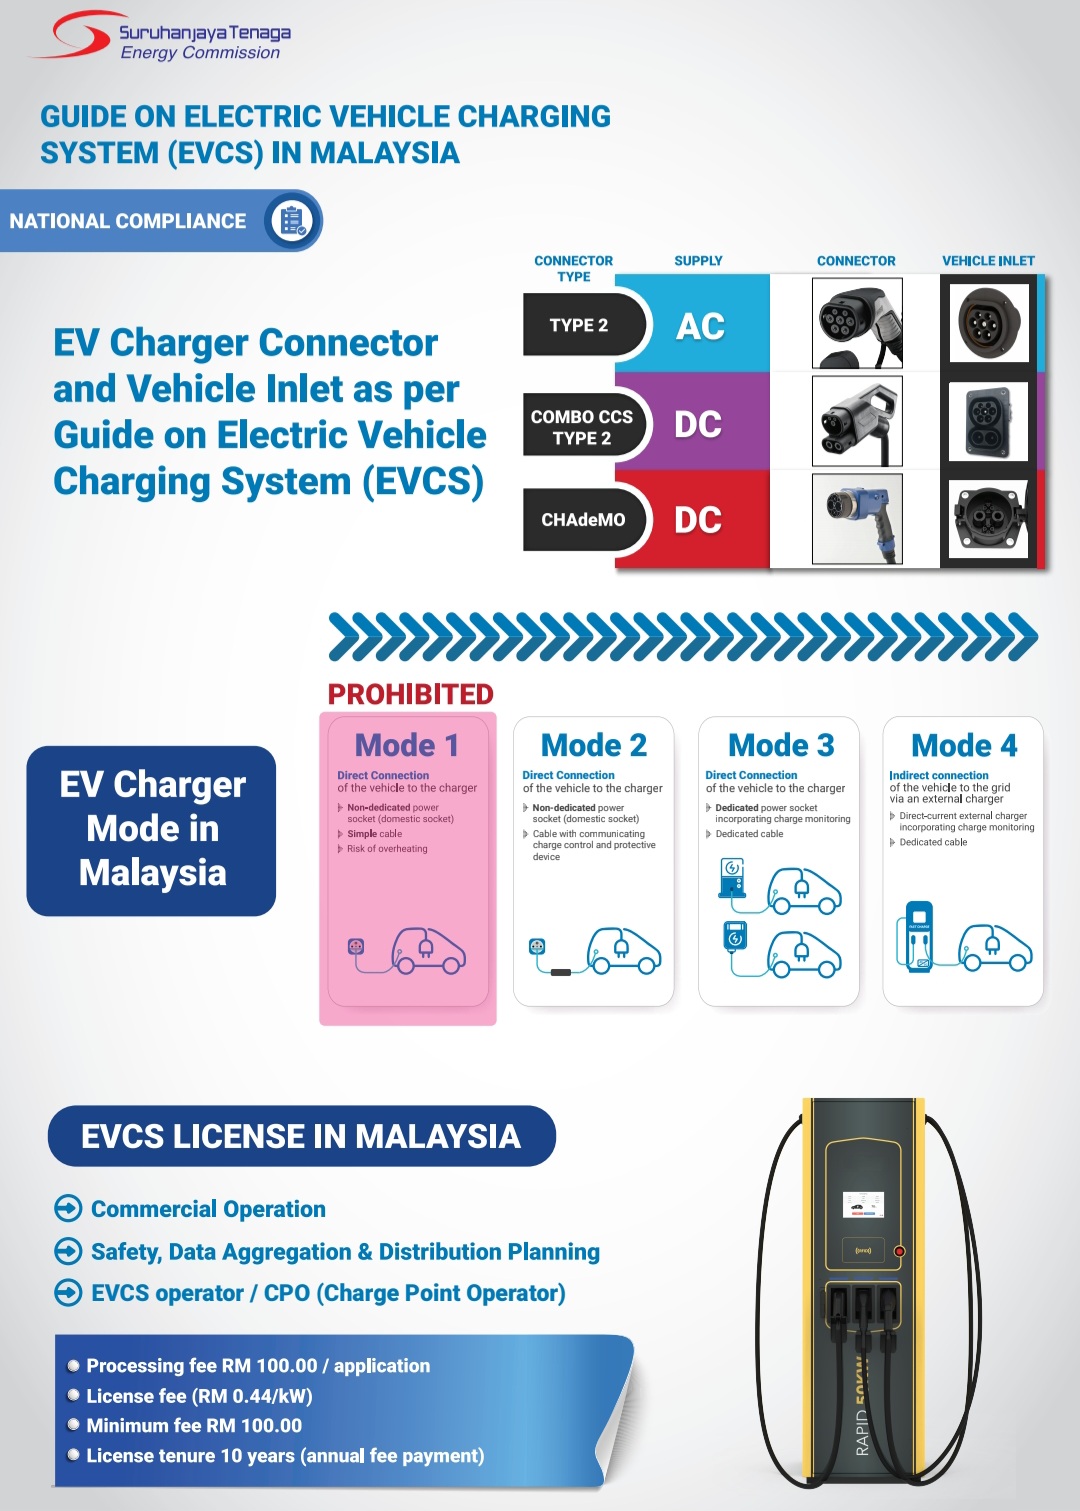 What Are The Safety Standards For EV Charger Installations In Malaysia?